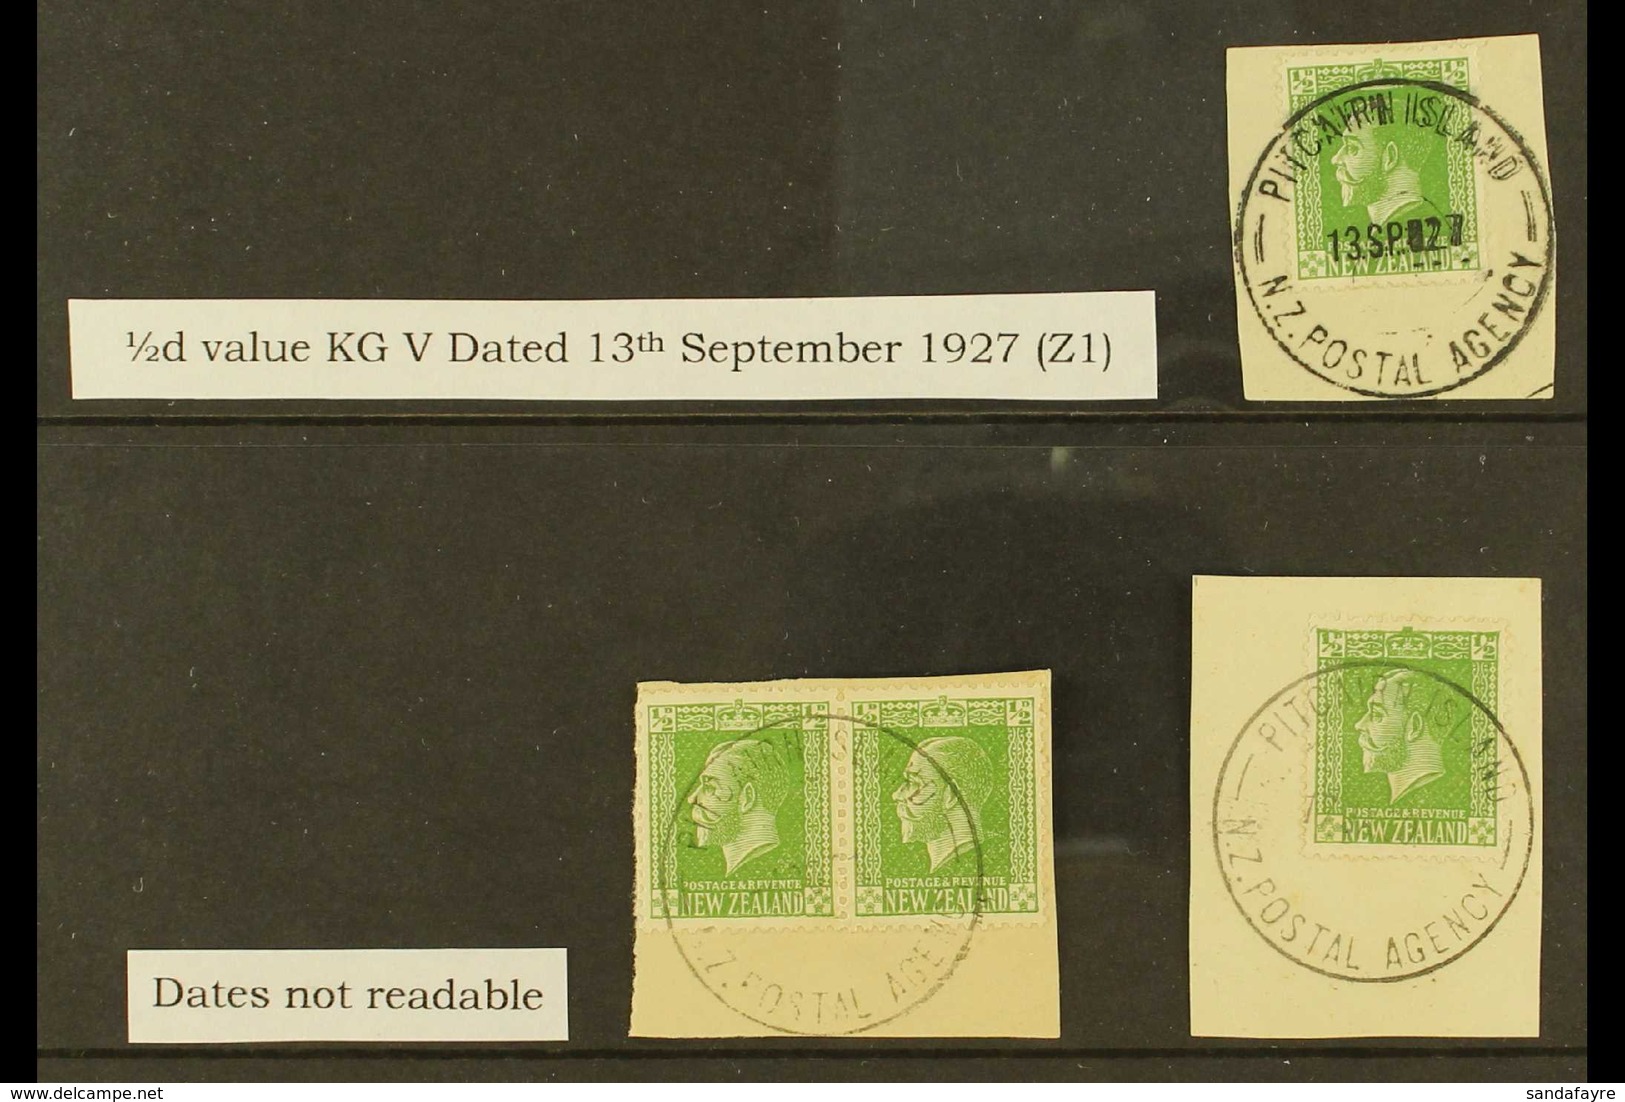 1915-29 ½d KGV Of New Zealand With "PITCAIRN ISLAND" Cds Cancels On-piece Group, SG Z1, One With Very Fine Complete Canc - Pitcairn Islands